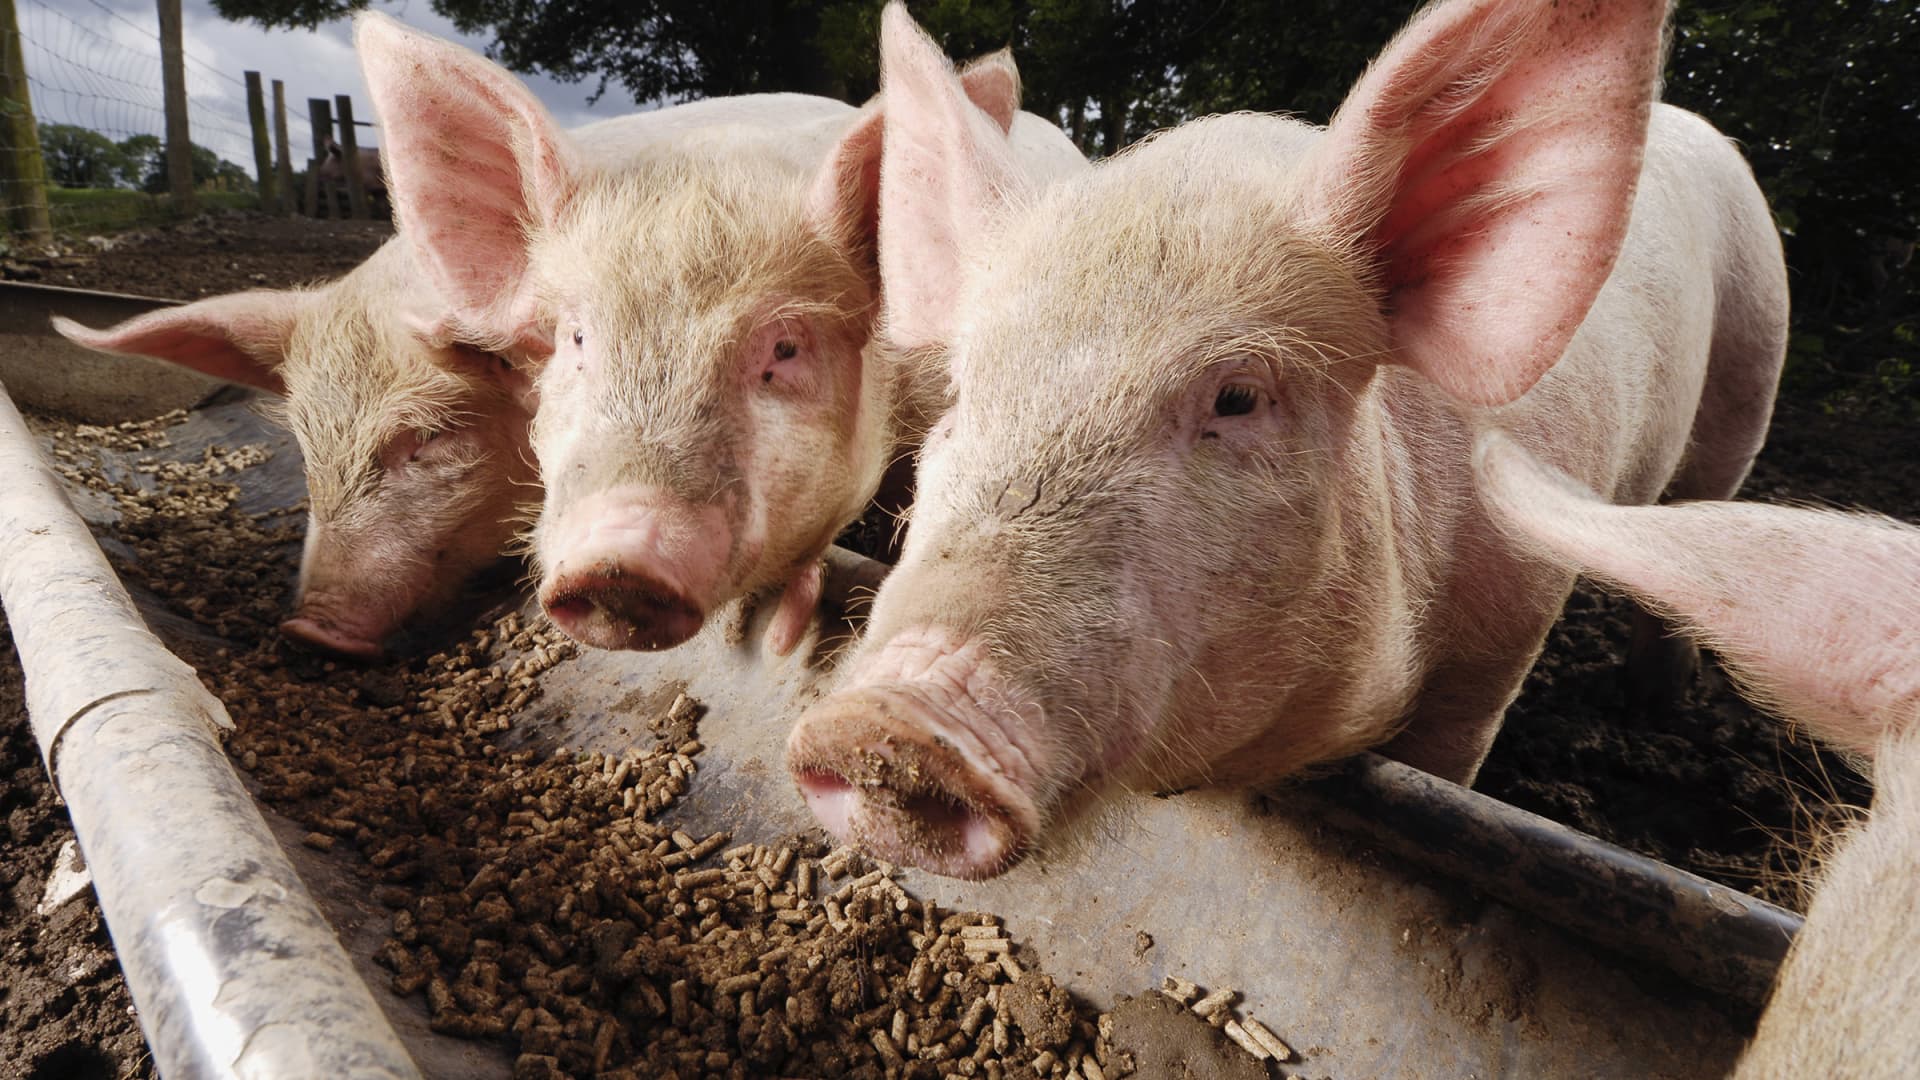 Use of China animal feed in US raises concern amid swine fever in Asia